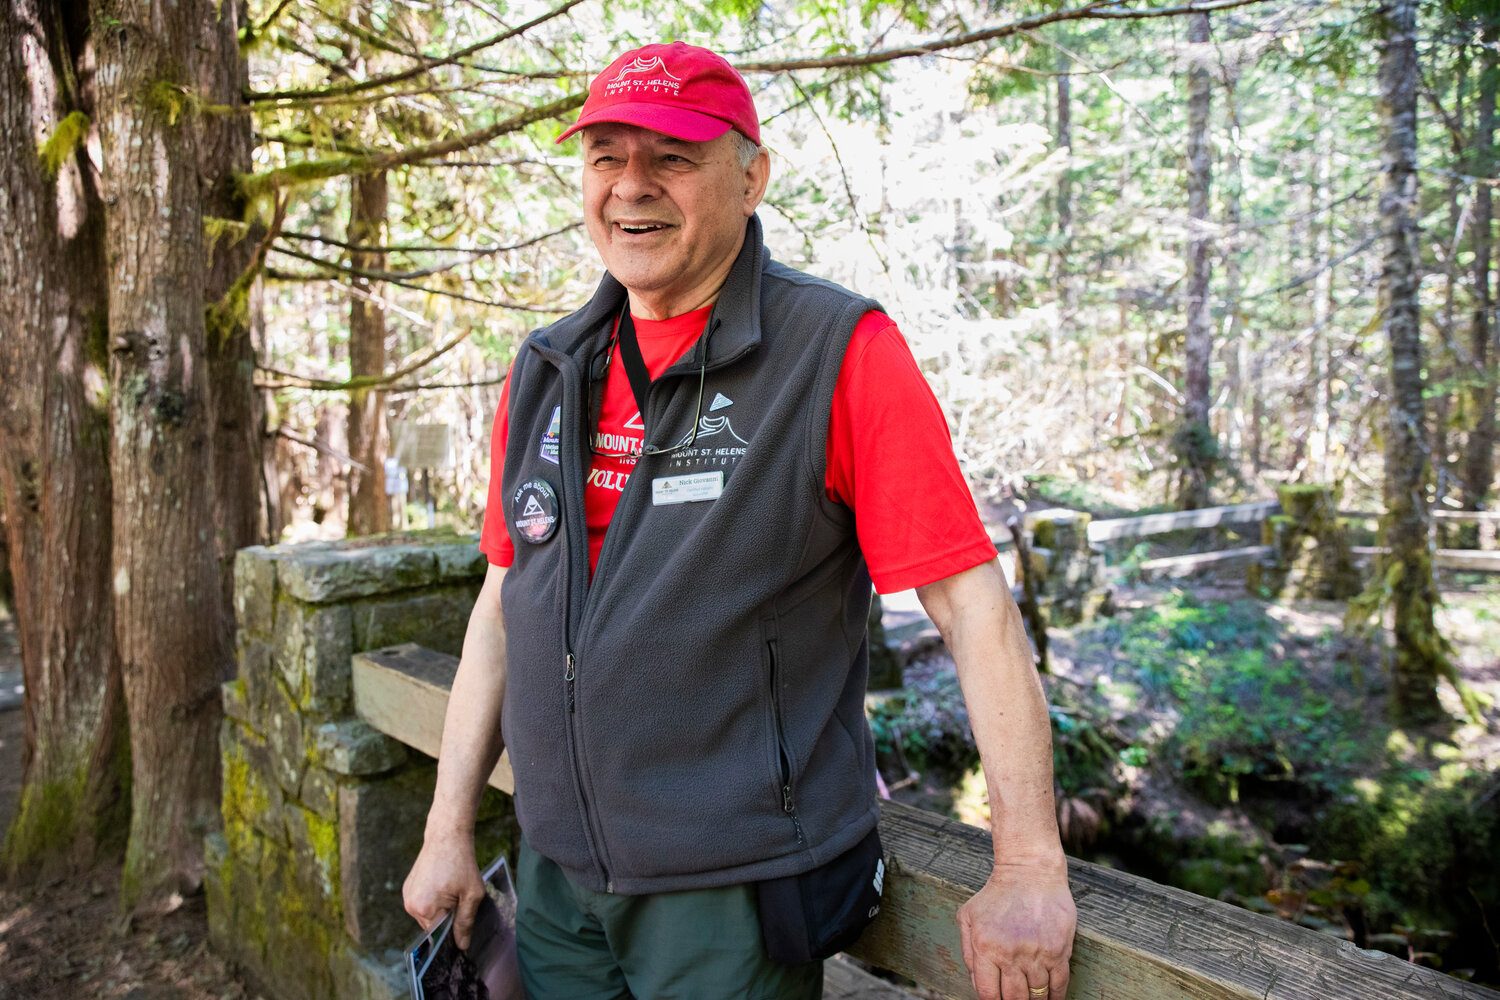 Certified Volcano Naturalist Nick Giovanni smiles while talking about the 1980 eruption of Mount St. Helens at the entrance to the Ape Cave Interpretive Site in Cougar on opening day Thursday, May 18.